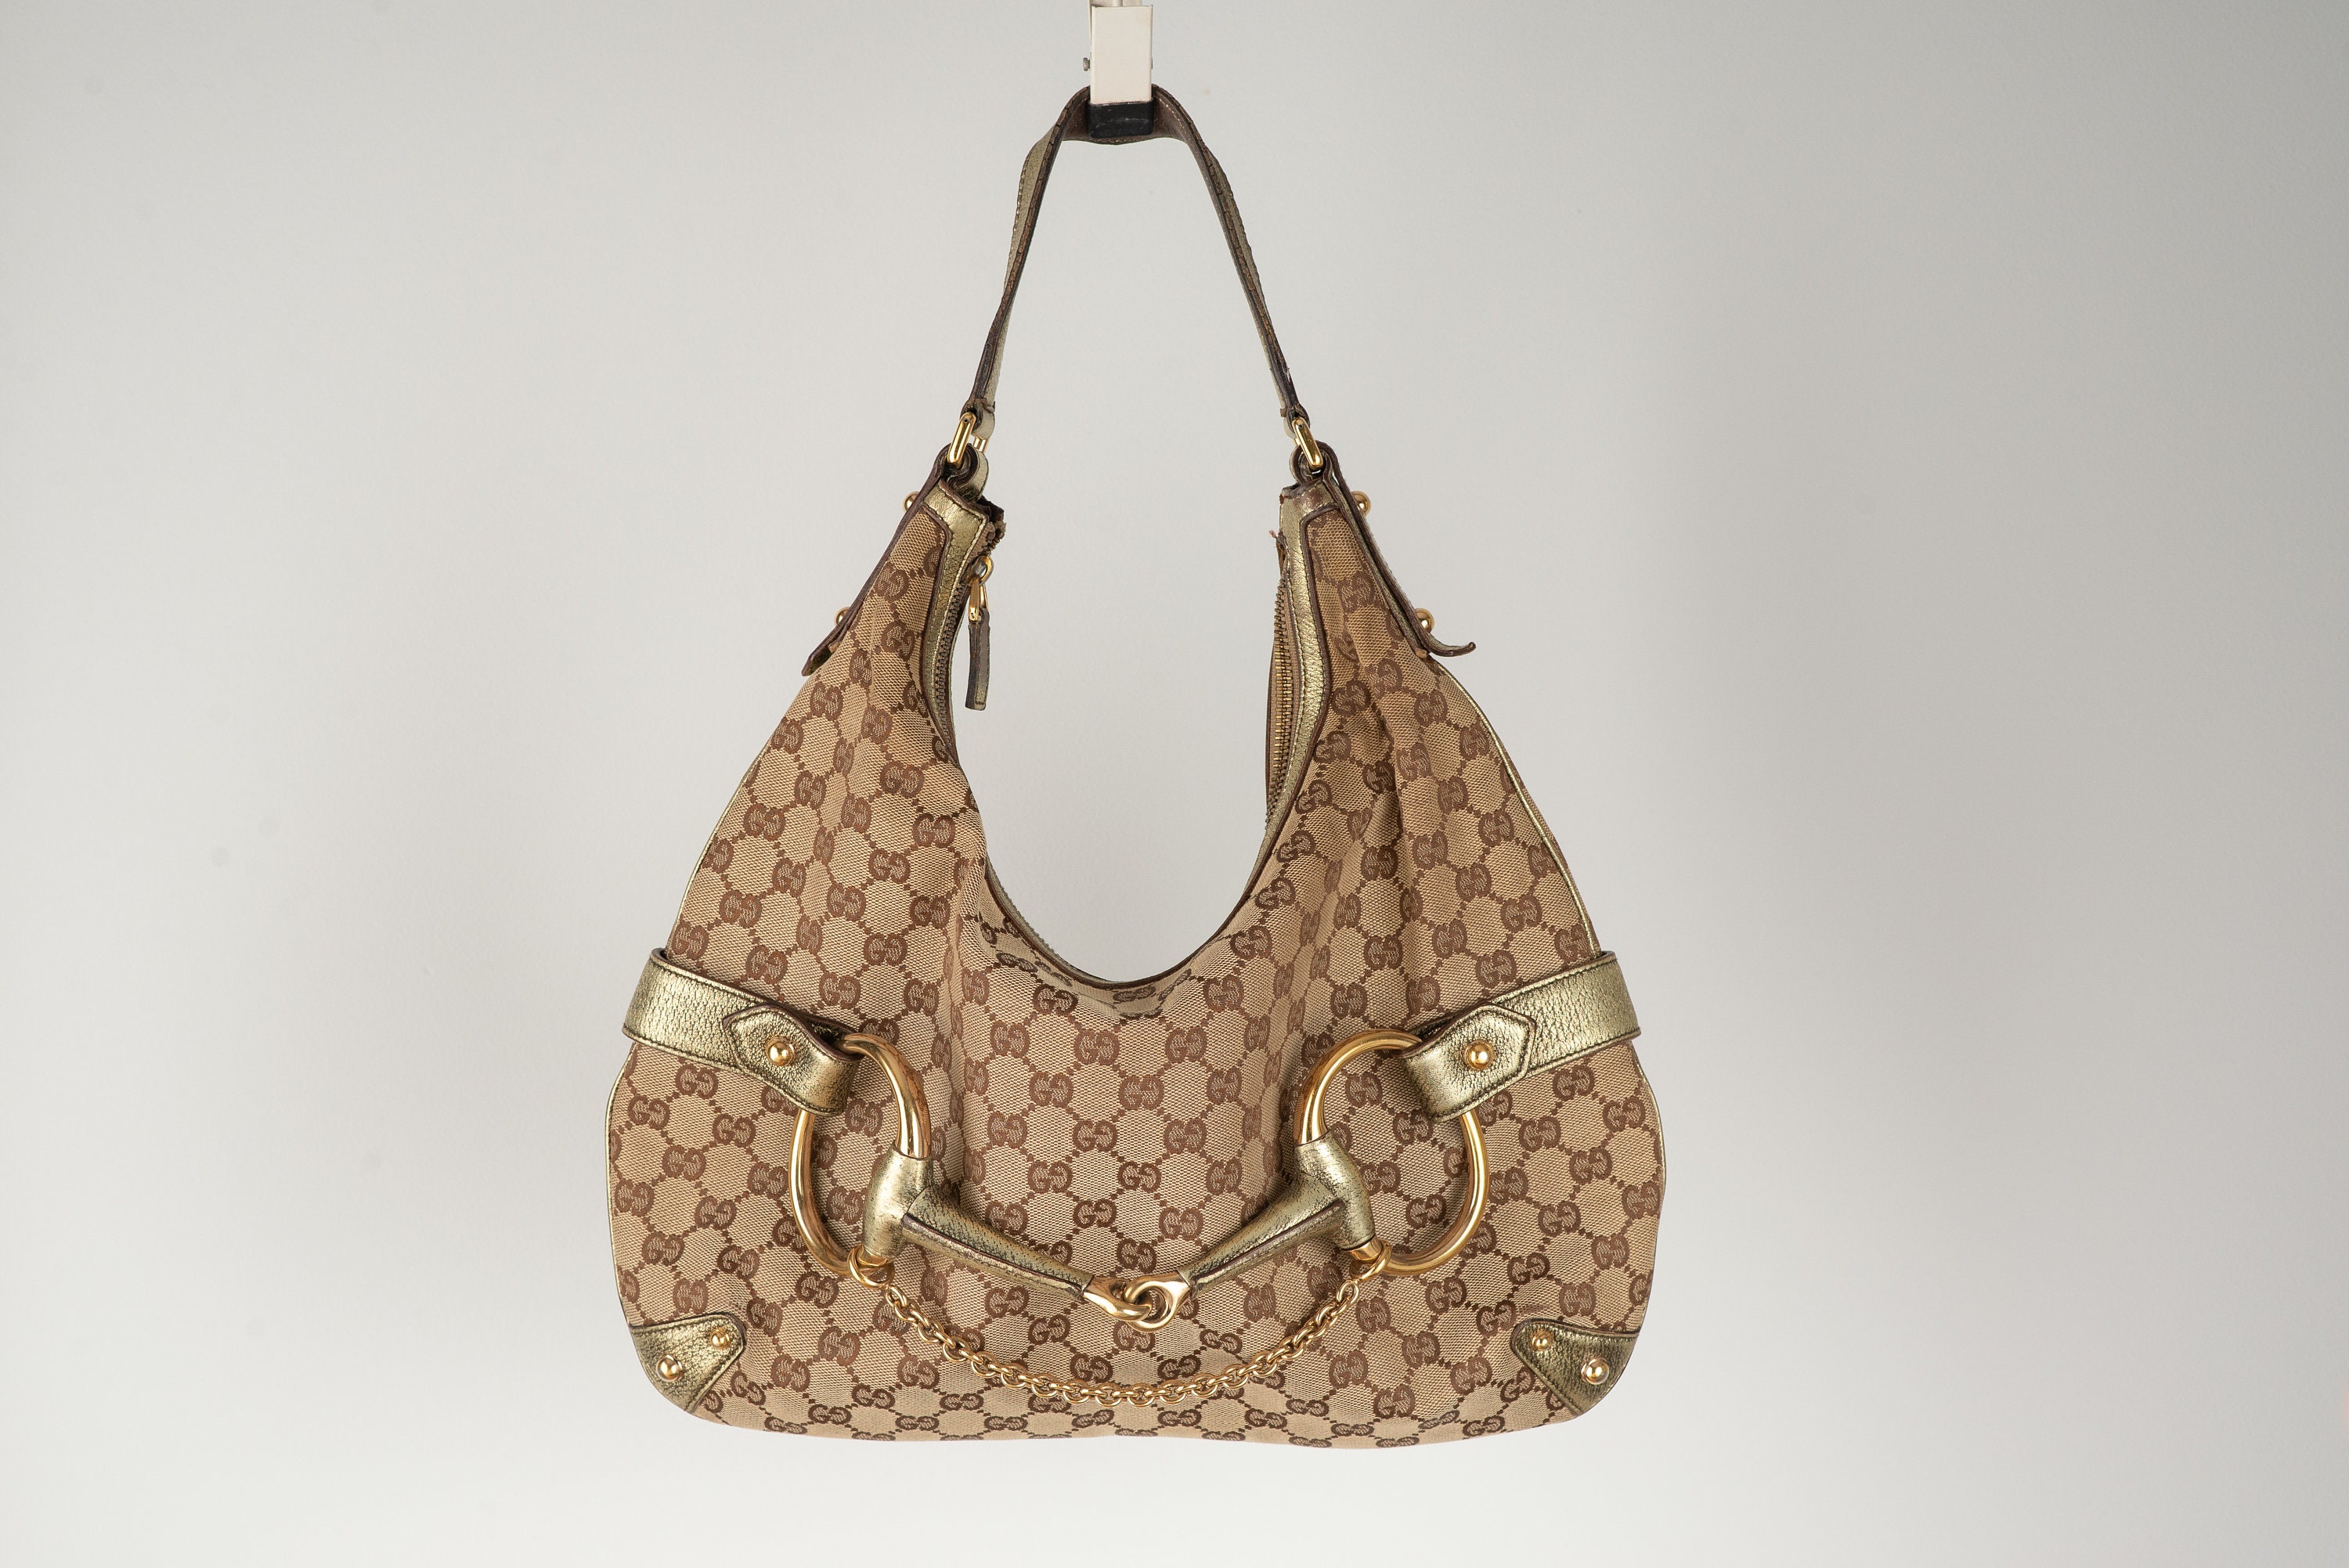 Buy Gucci Hobo Bag Online In India -  India